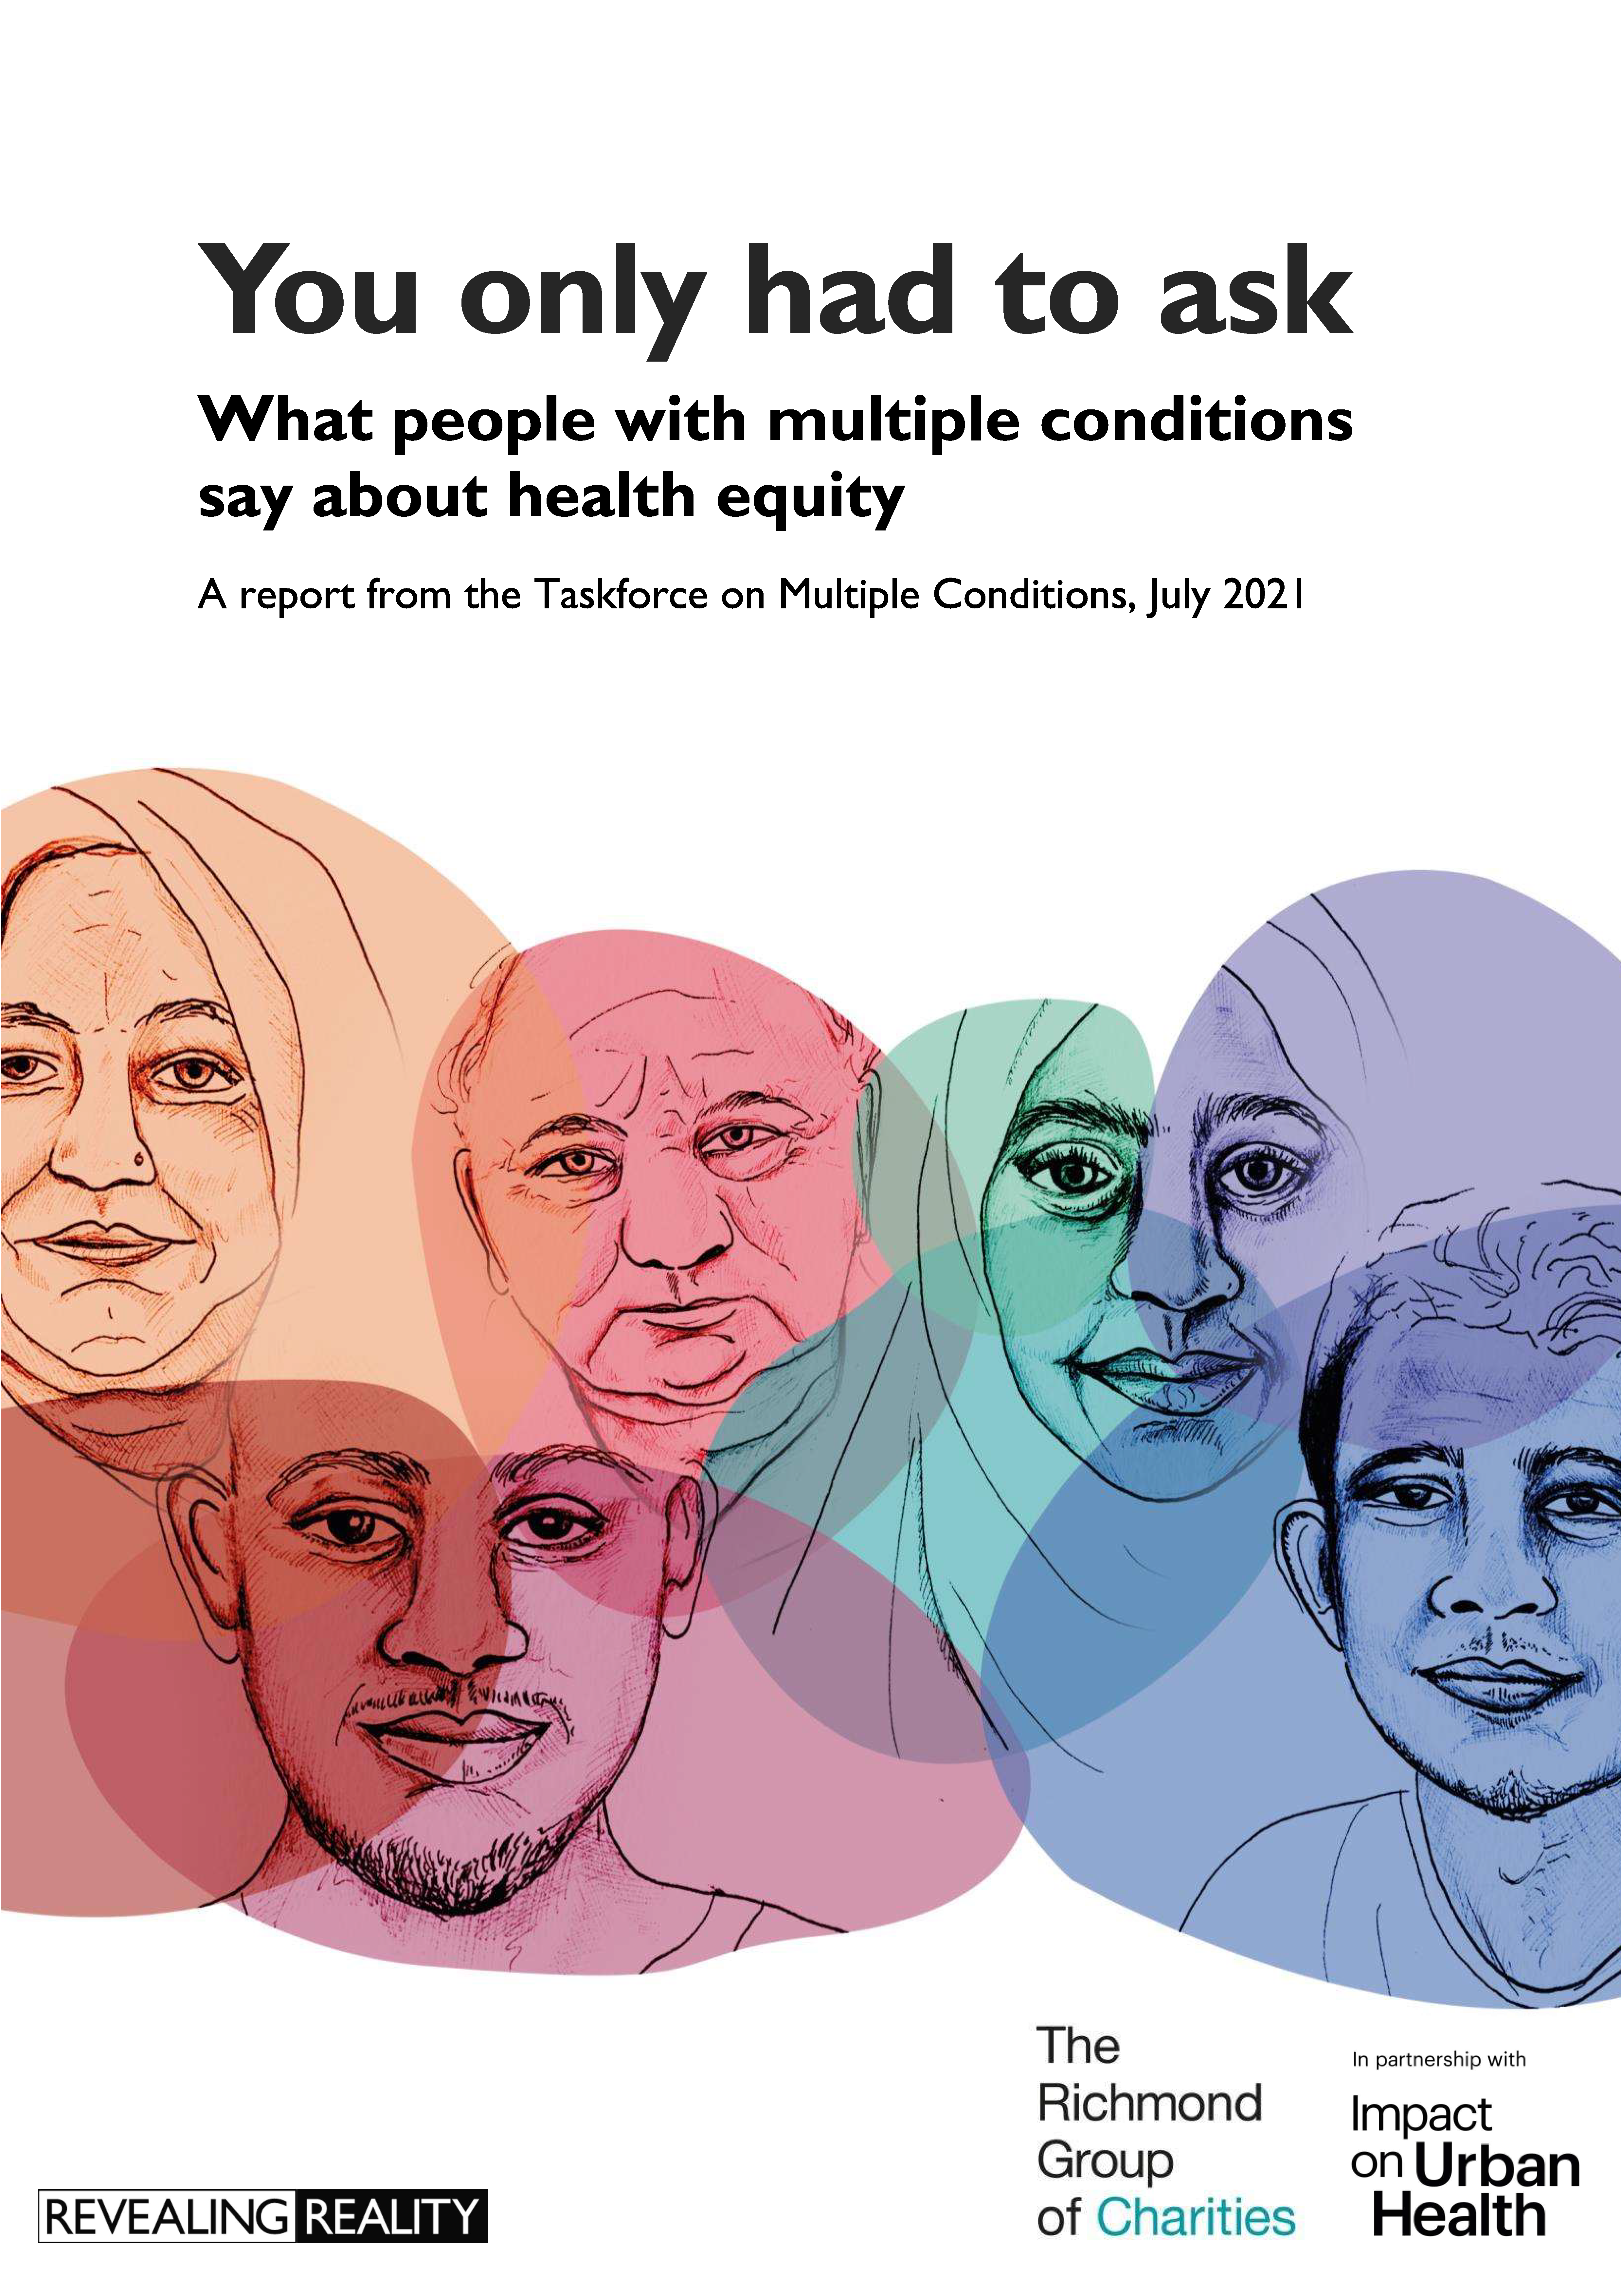 You only had to ask: What people with multiple conditions say about health equity